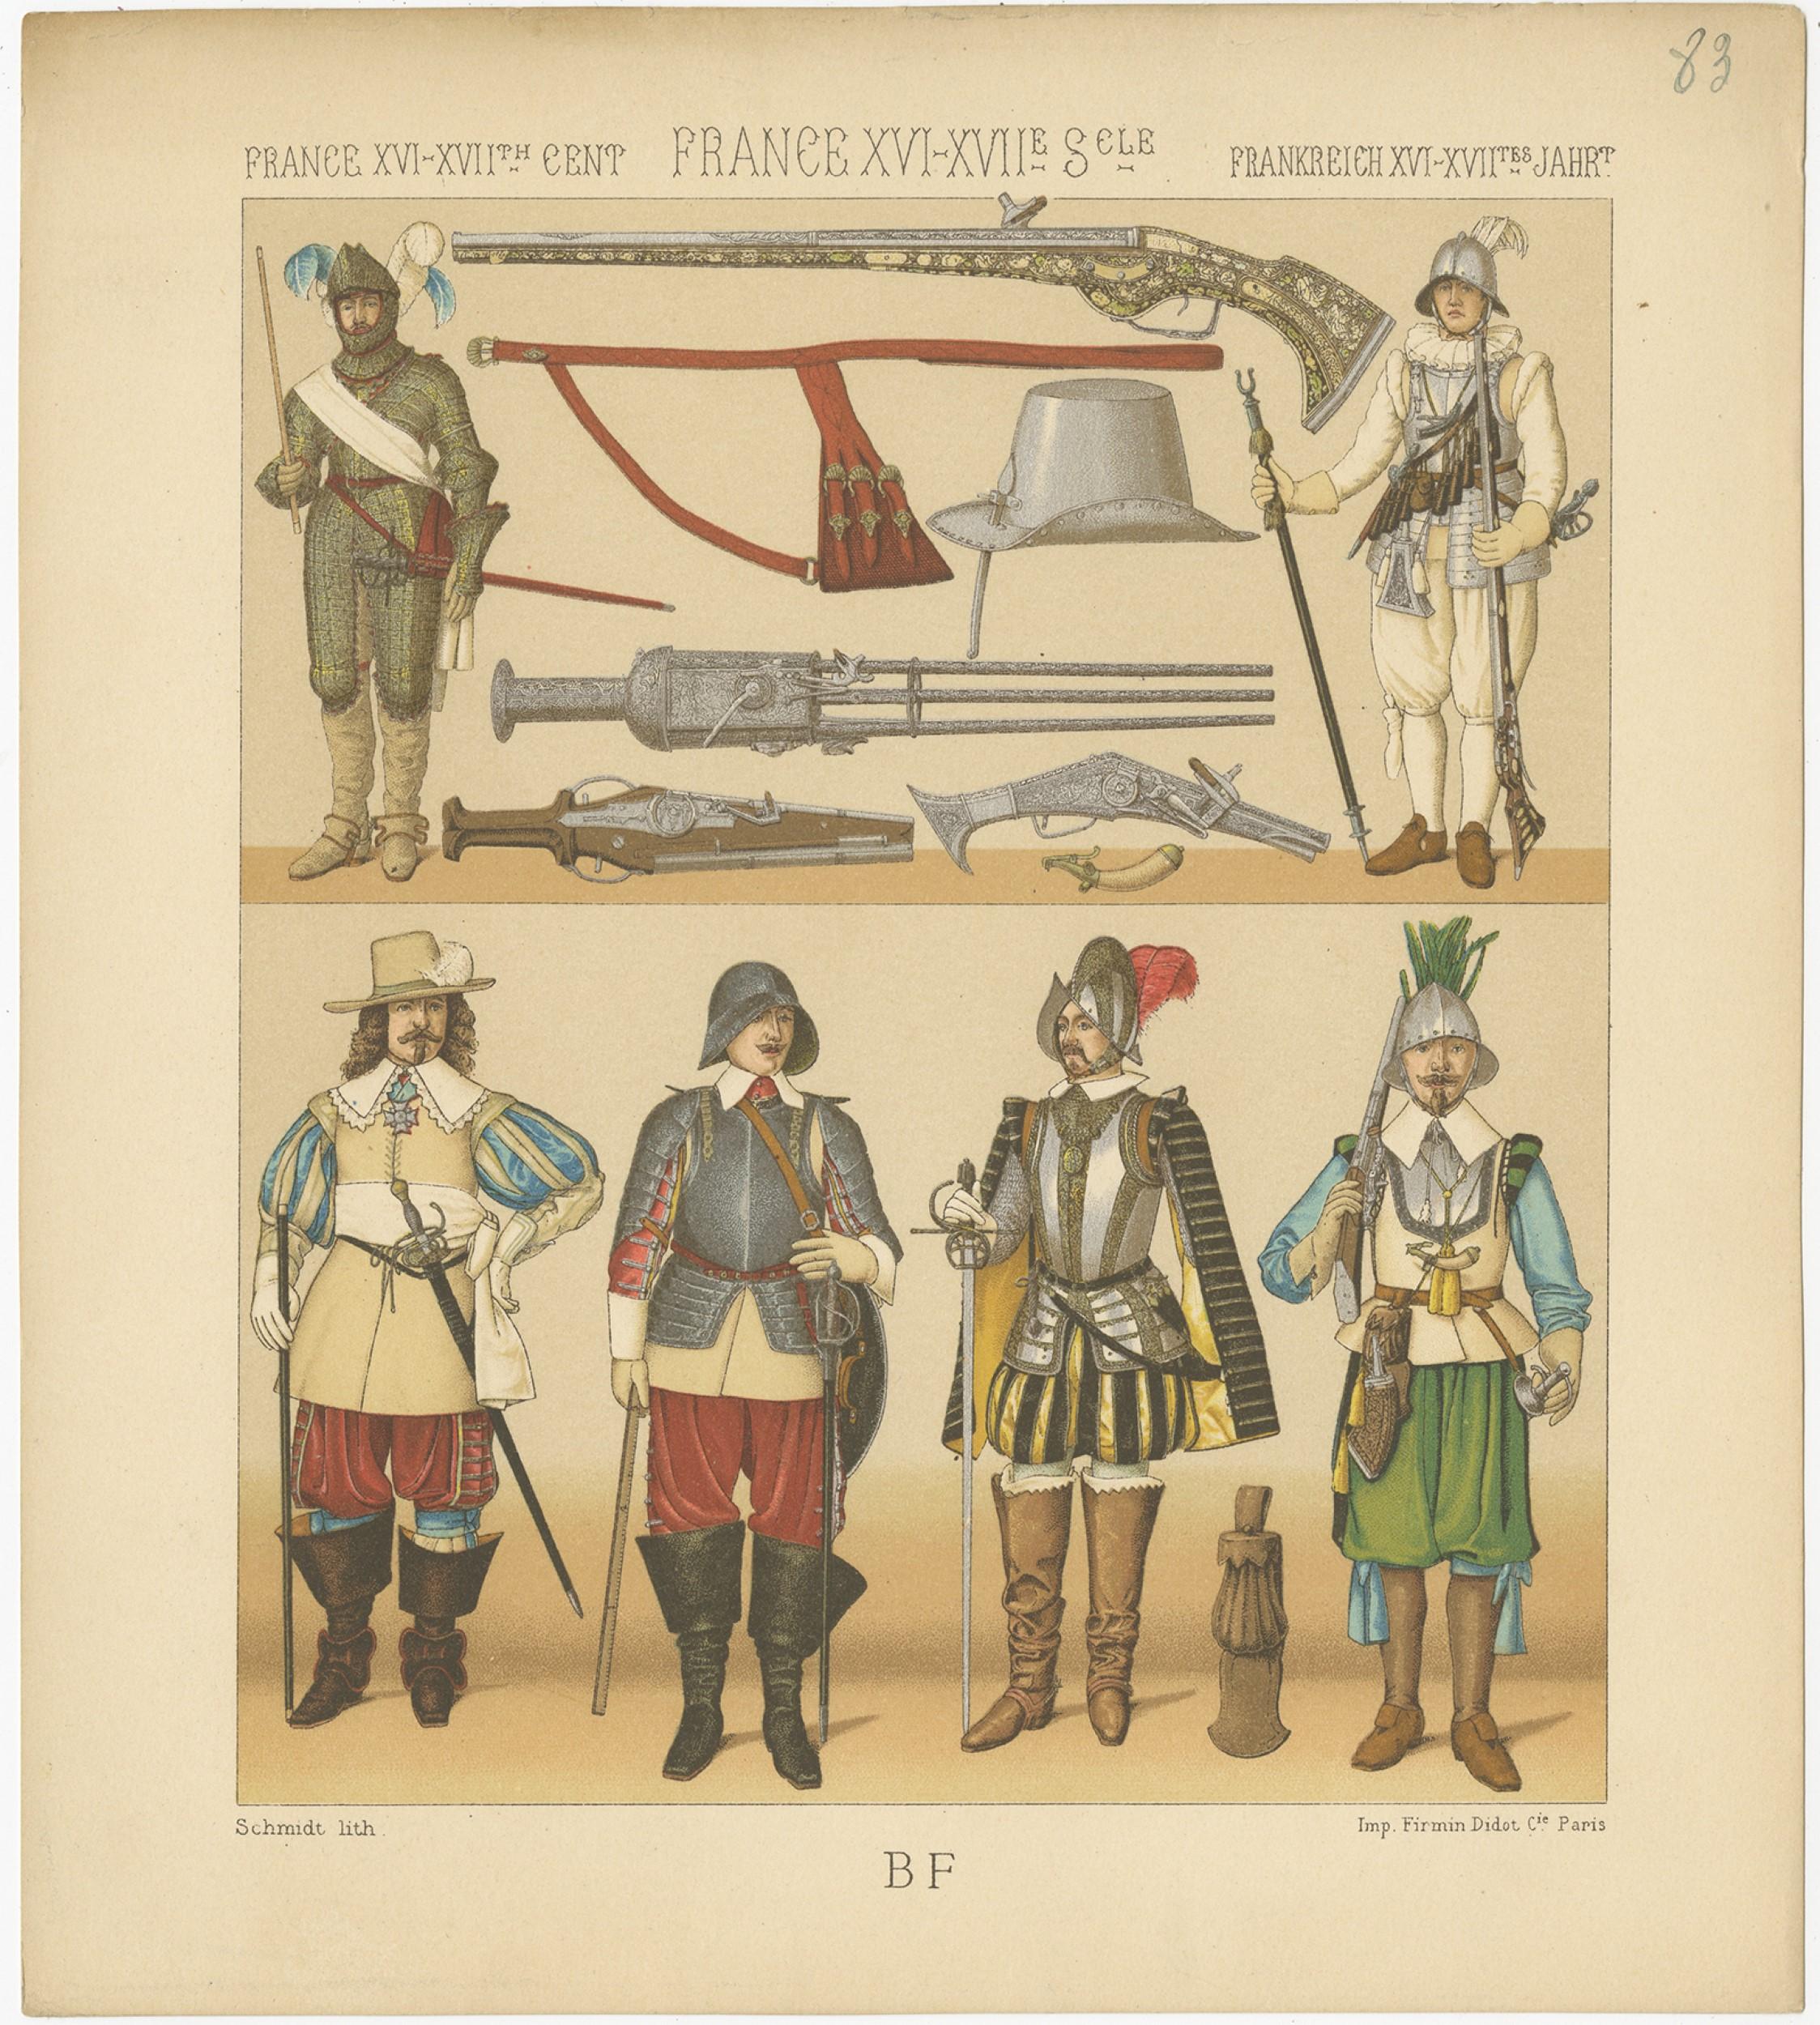 Antique print titled 'France XVI, XVIIth Cent - France XVI, XVIIe Siecle - Frankreich XVI, XVIItes Jahr'. Chromolithograph of French XVIth, XVIIth century battle costumes. This print originates from 'Le Costume Historique' by M.A. Racinet. Published